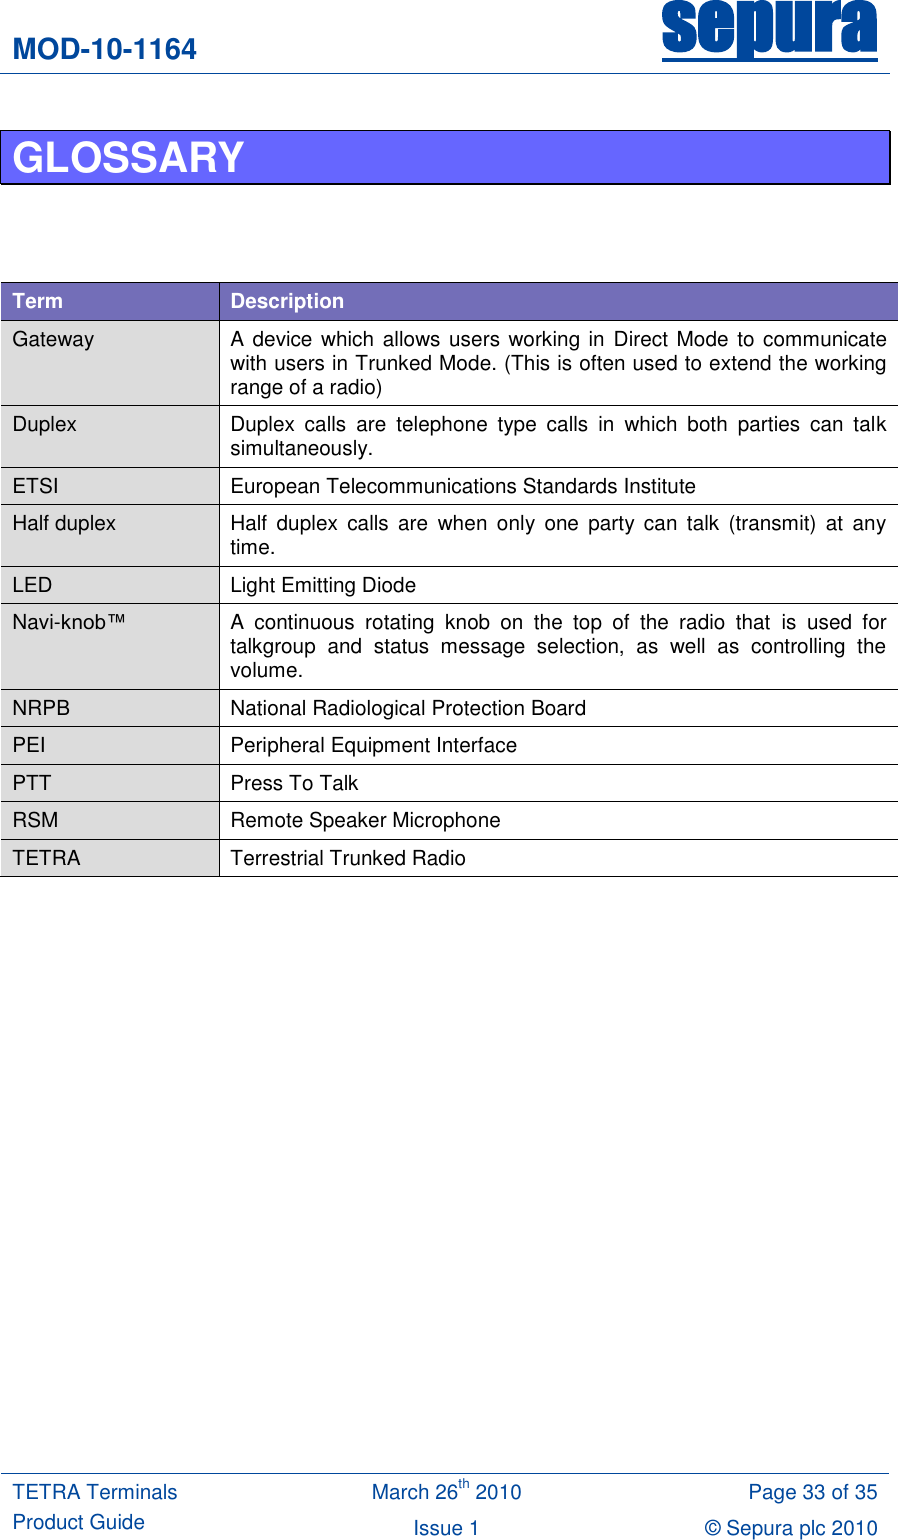 MOD-10-1164 sepura  TETRA Terminals Product Guide March 26th 2010 Page 33 of 35 Issue 1 © Sepura plc 2010   GLOSSARY     Term Description Gateway A device  which  allows users  working in Direct Mode  to communicate with users in Trunked Mode. (This is often used to extend the working range of a radio) Duplex Duplex  calls  are  telephone  type  calls  in  which  both  parties  can  talk simultaneously.  ETSI European Telecommunications Standards Institute Half duplex Half  duplex  calls  are  when  only  one  party  can  talk  (transmit)  at  any time. LED Light Emitting Diode Navi-knob™  A  continuous  rotating  knob  on  the  top  of  the  radio  that  is  used  for talkgroup  and  status  message  selection,  as  well  as  controlling  the volume. NRPB National Radiological Protection Board PEI Peripheral Equipment Interface PTT Press To Talk RSM Remote Speaker Microphone TETRA Terrestrial Trunked Radio     